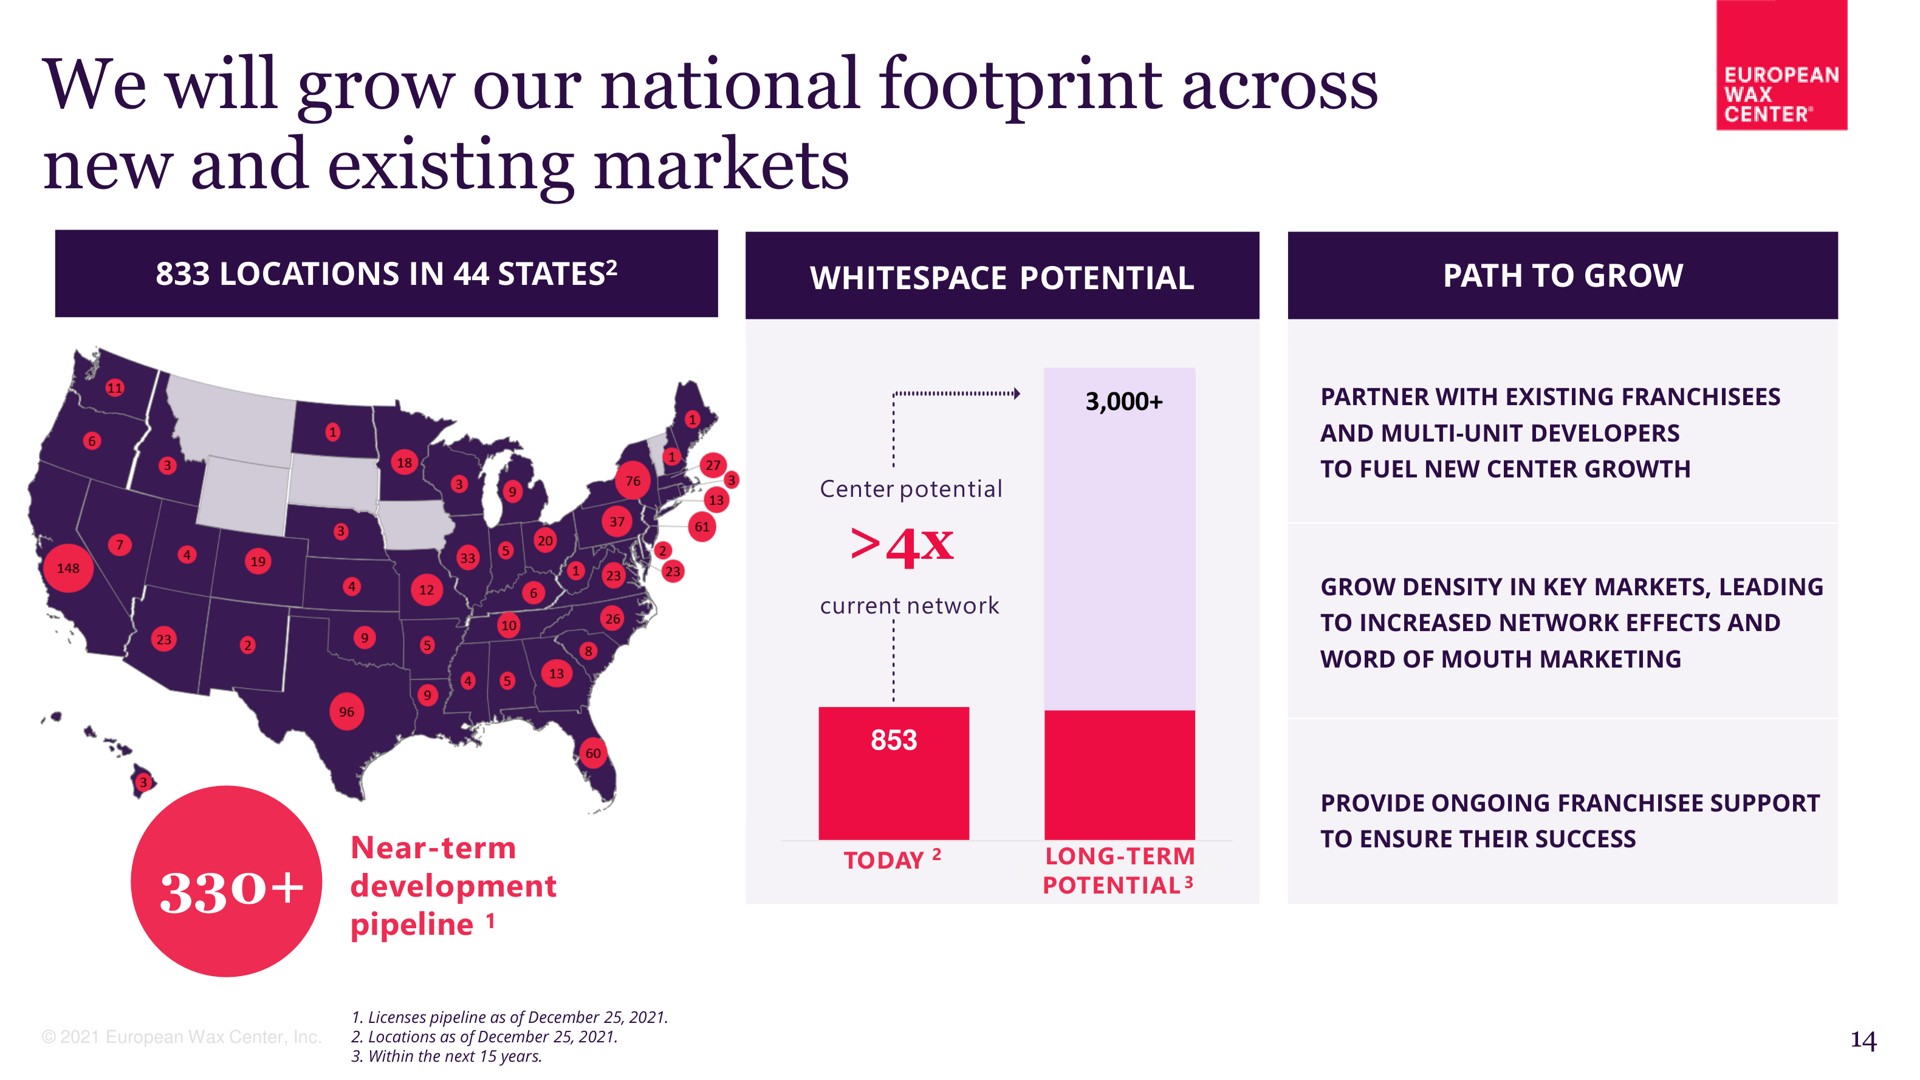 we will grow our national footprint across new and existing markets | European Wax Center